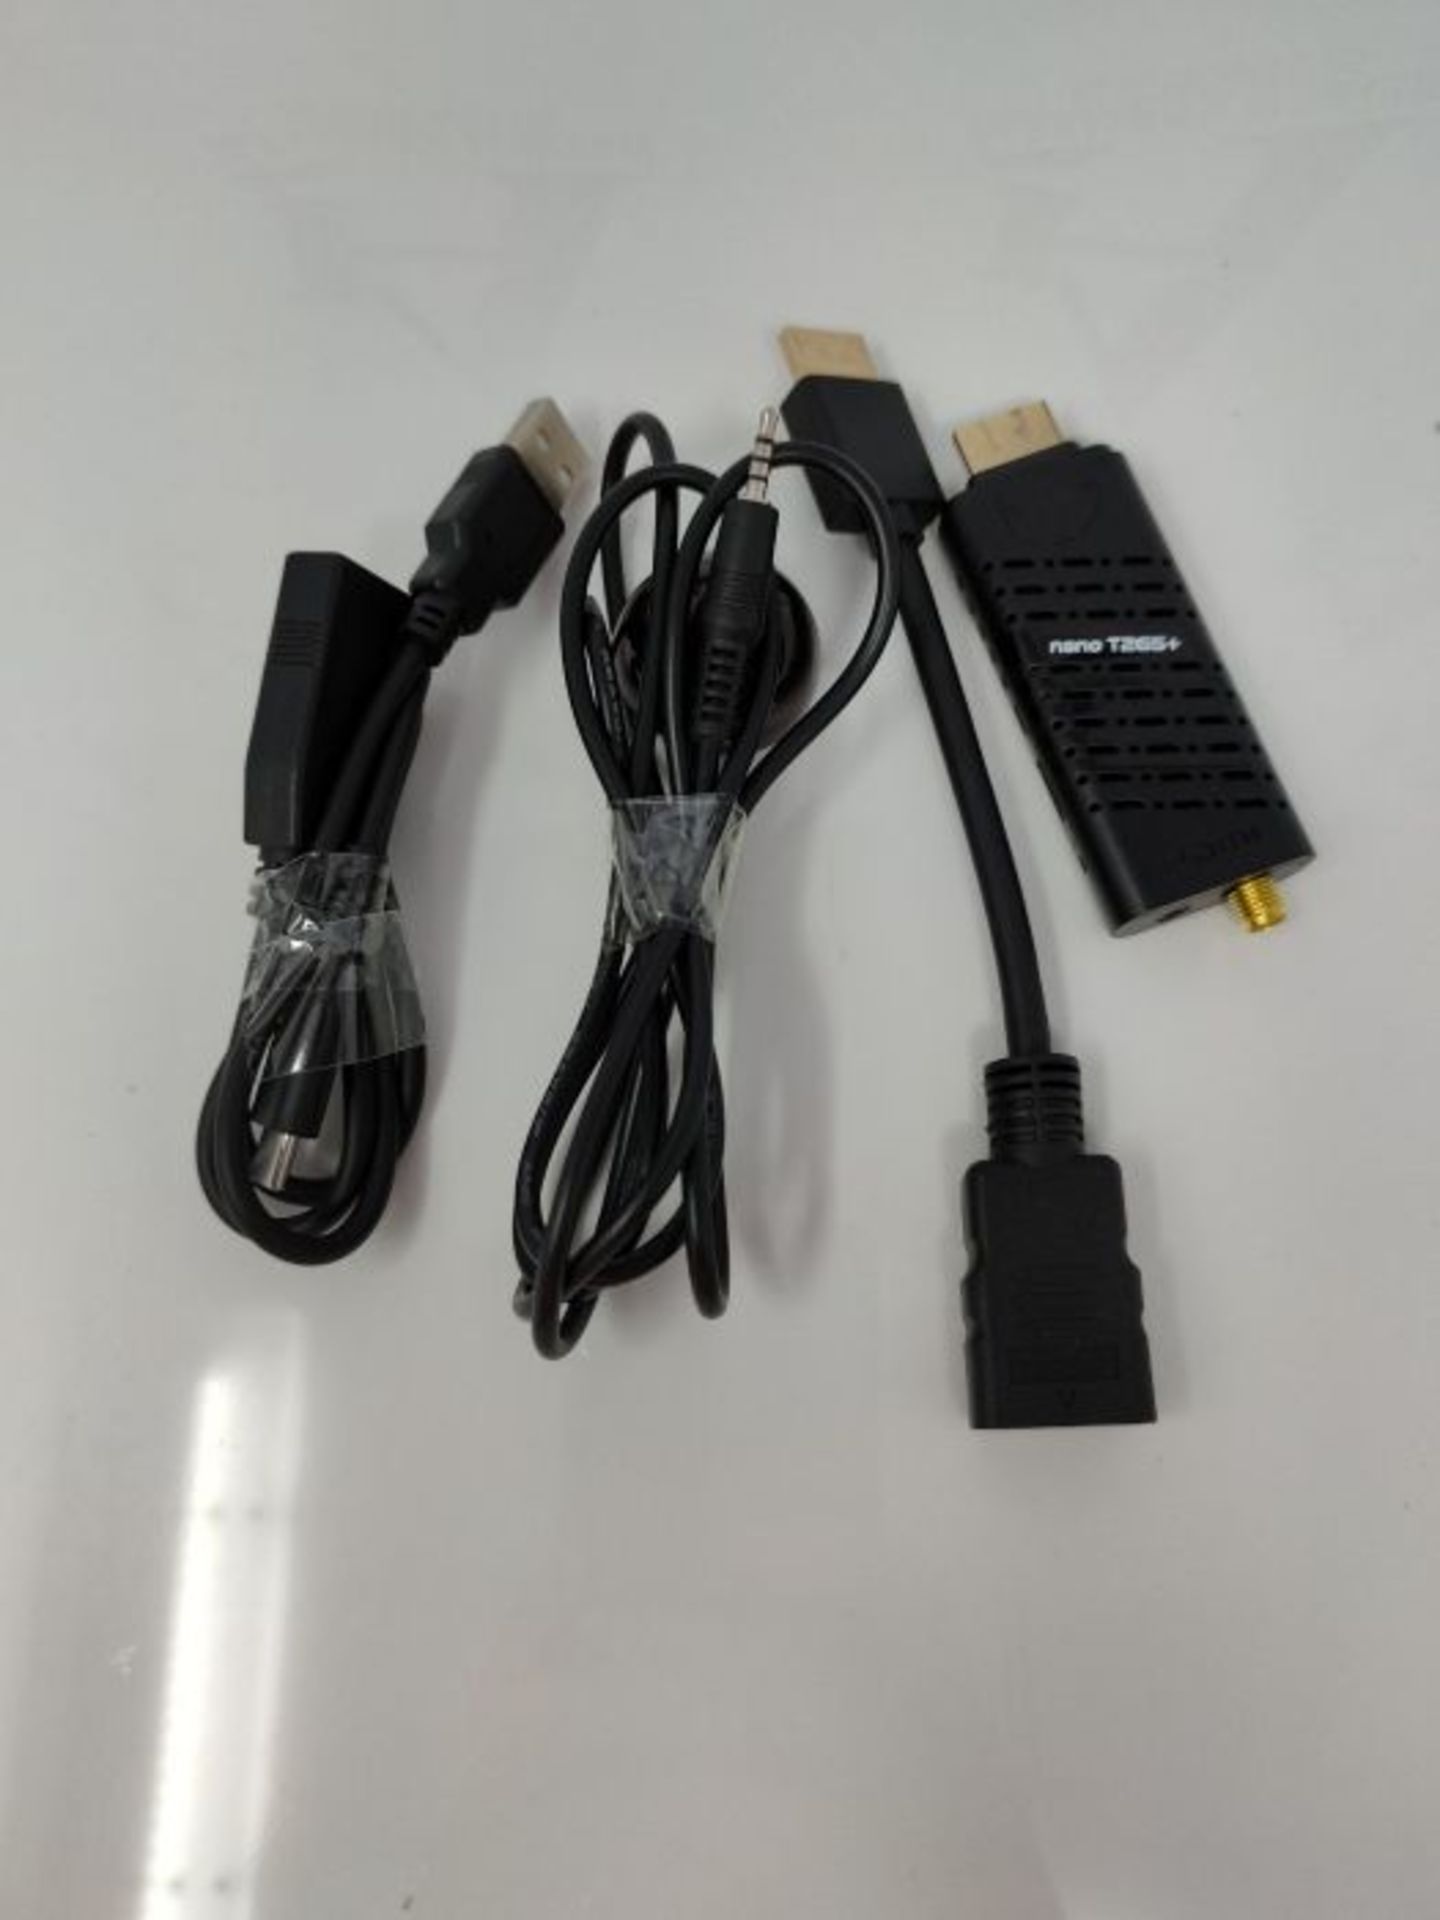 Edision NANO T265+ Terrestrial and Cable HDMI dongle Receiver, DVB-T2/C, H265 HEVC, FT - Image 2 of 2